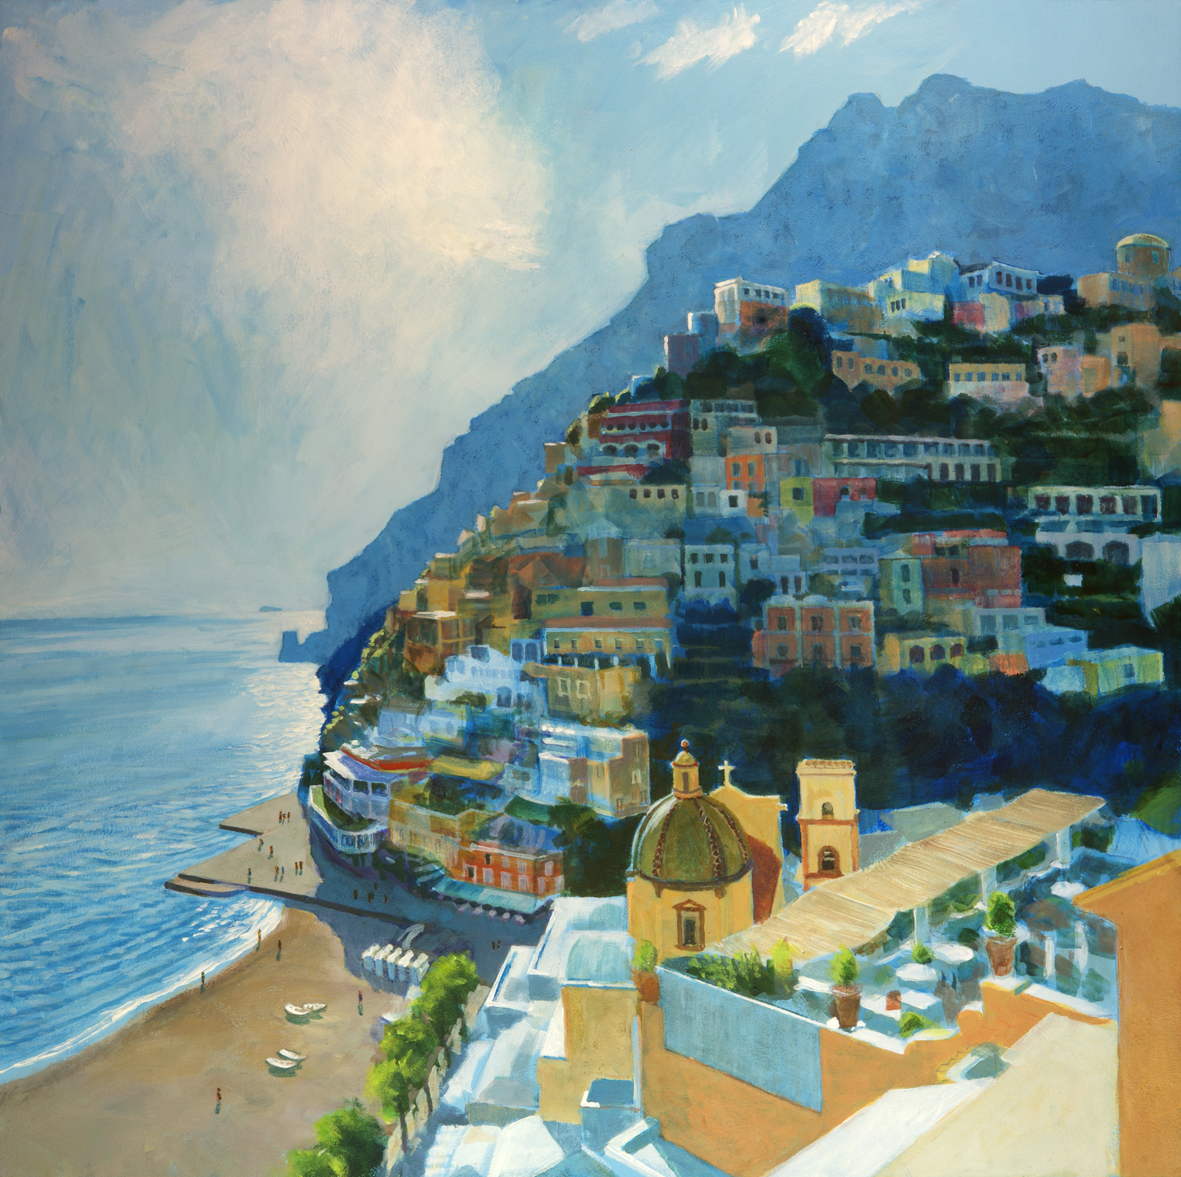 Picture Imperfect: Positano Painting Commission